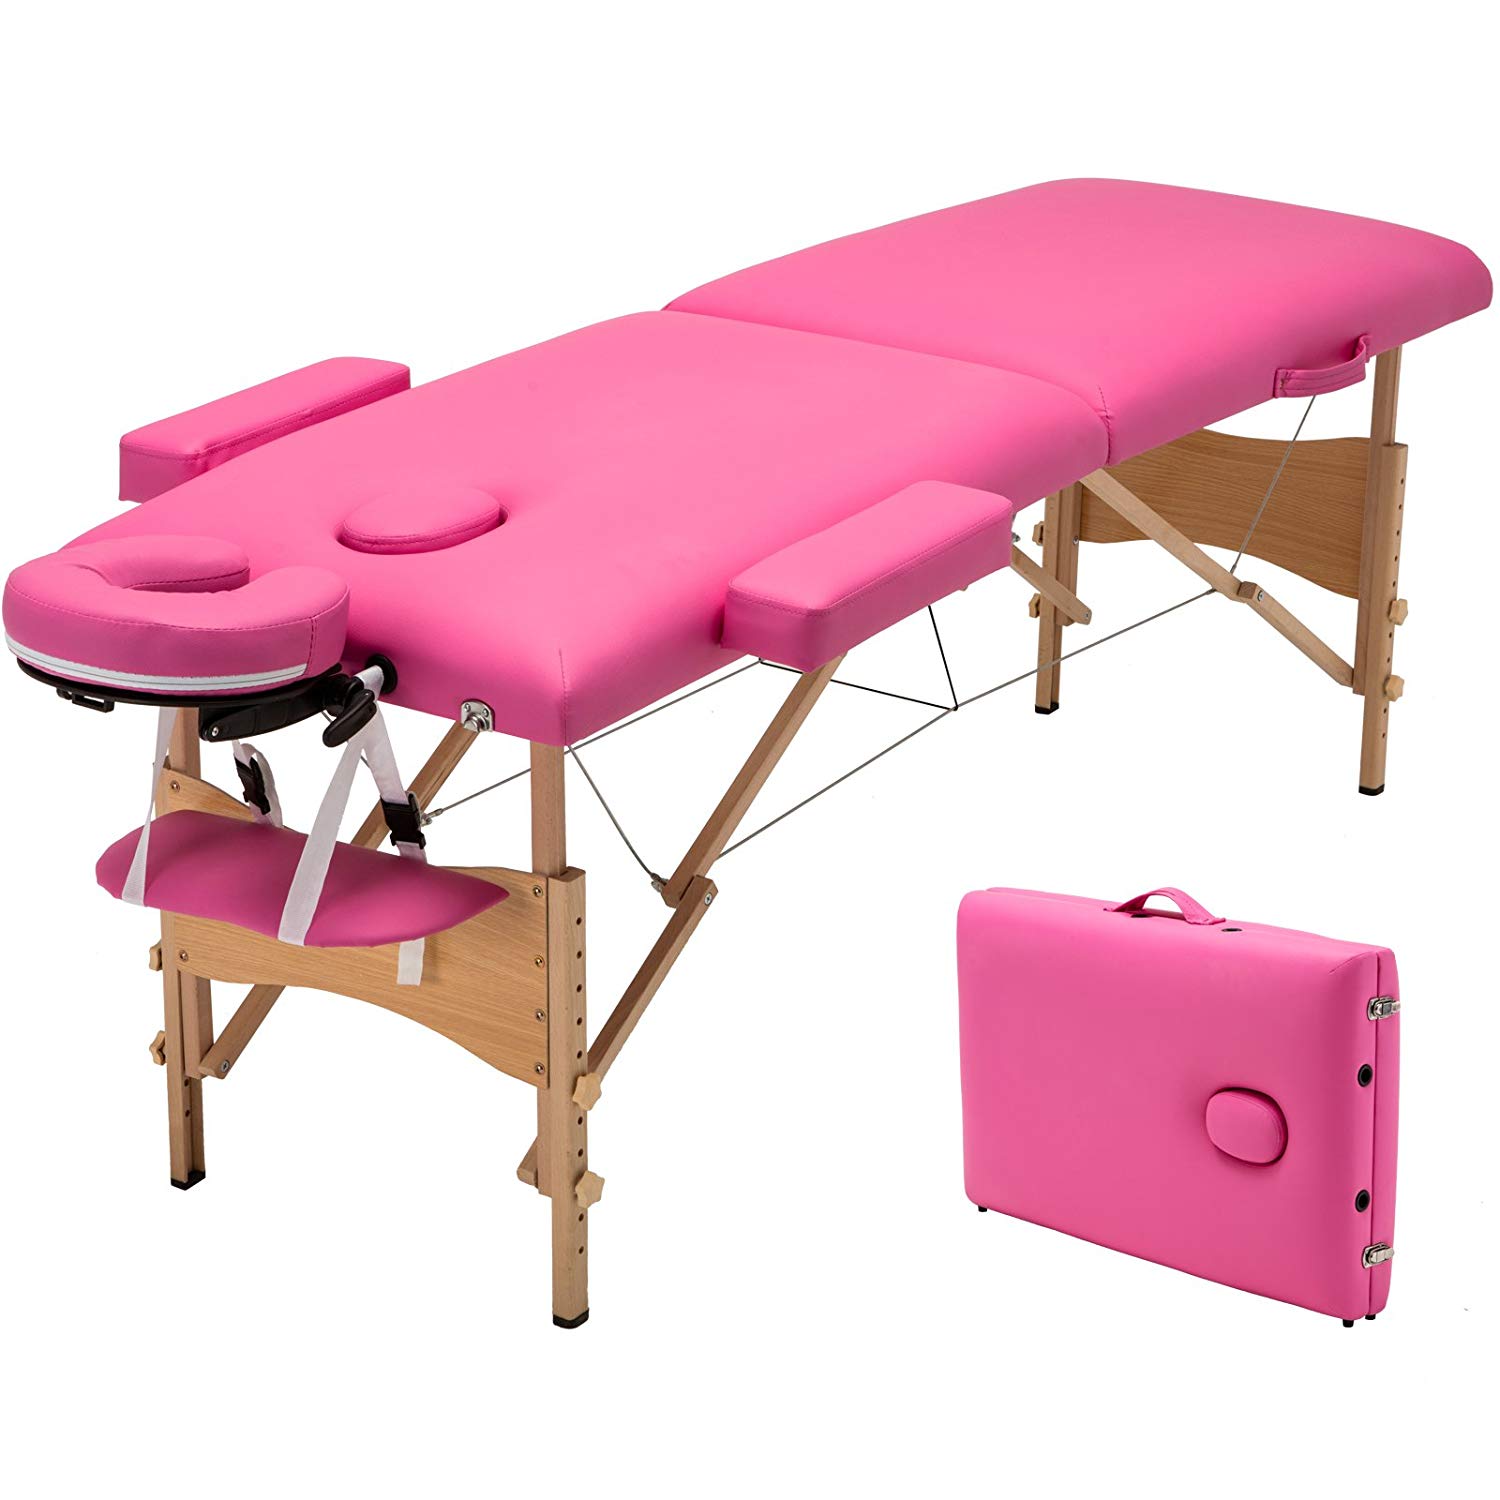 Top 10 Best Portable Massage Table Reviews In 2022 Top Best Pro Reviews